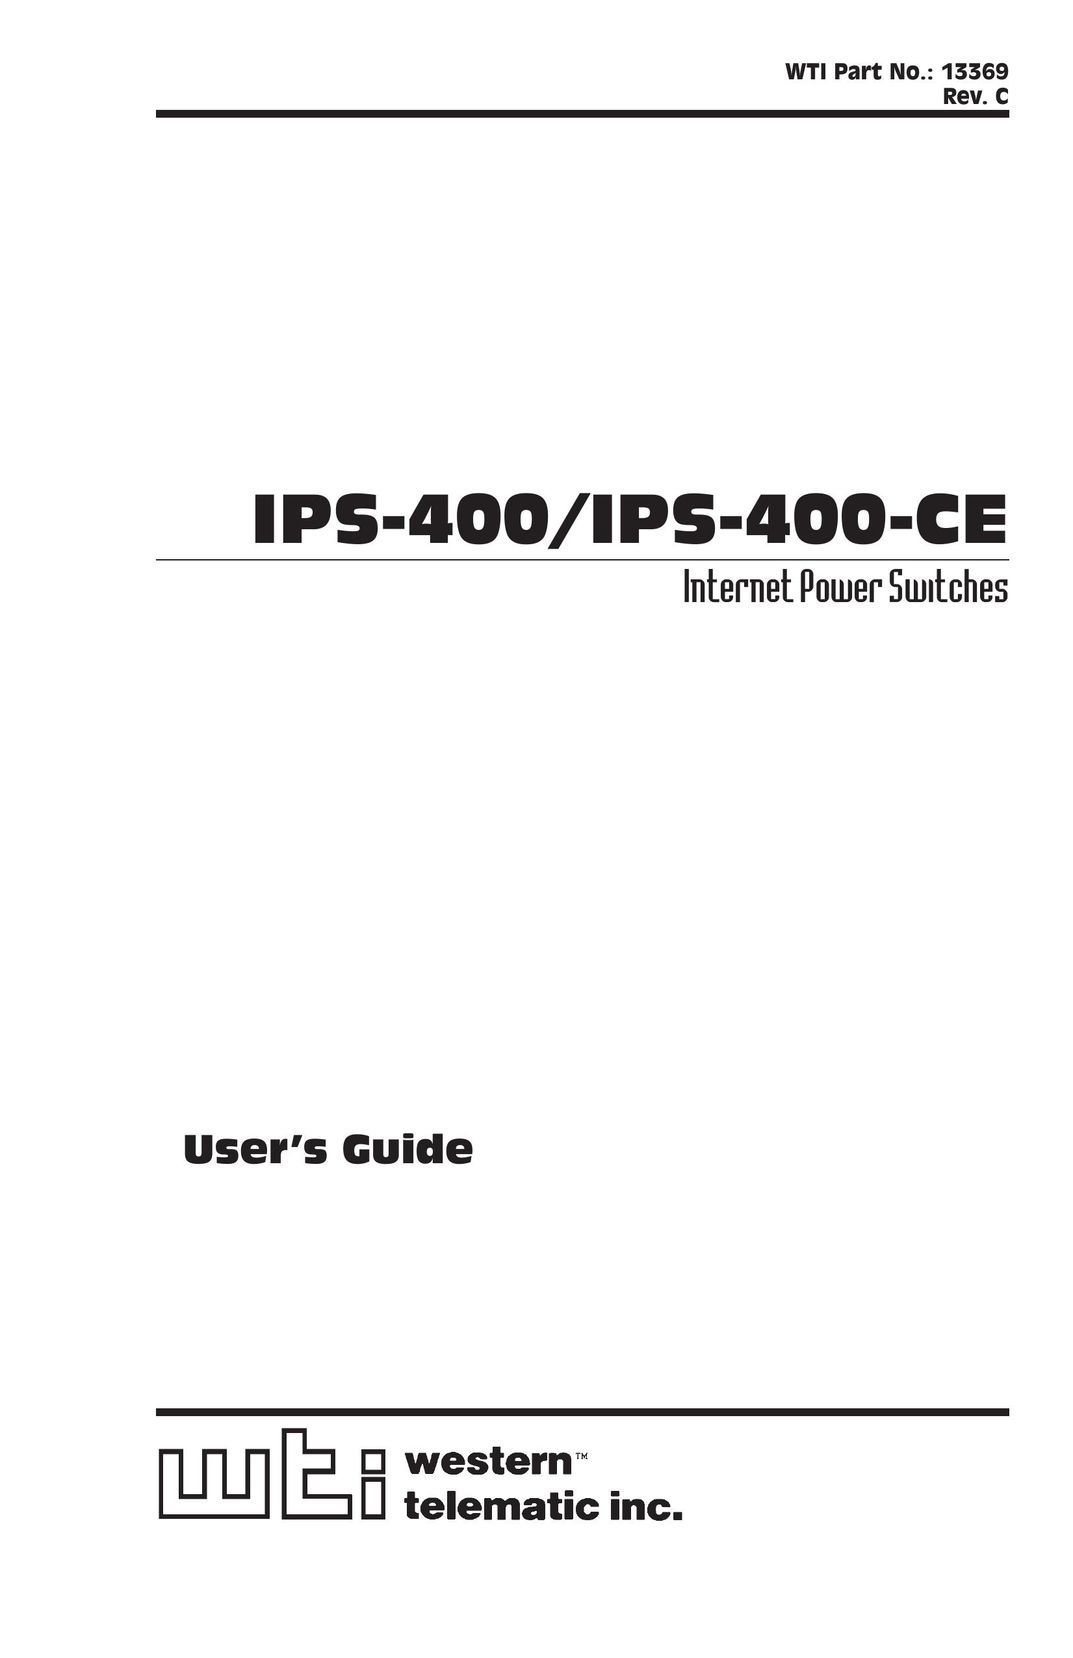 Western Telematic IPS-400-CE Switch User Manual